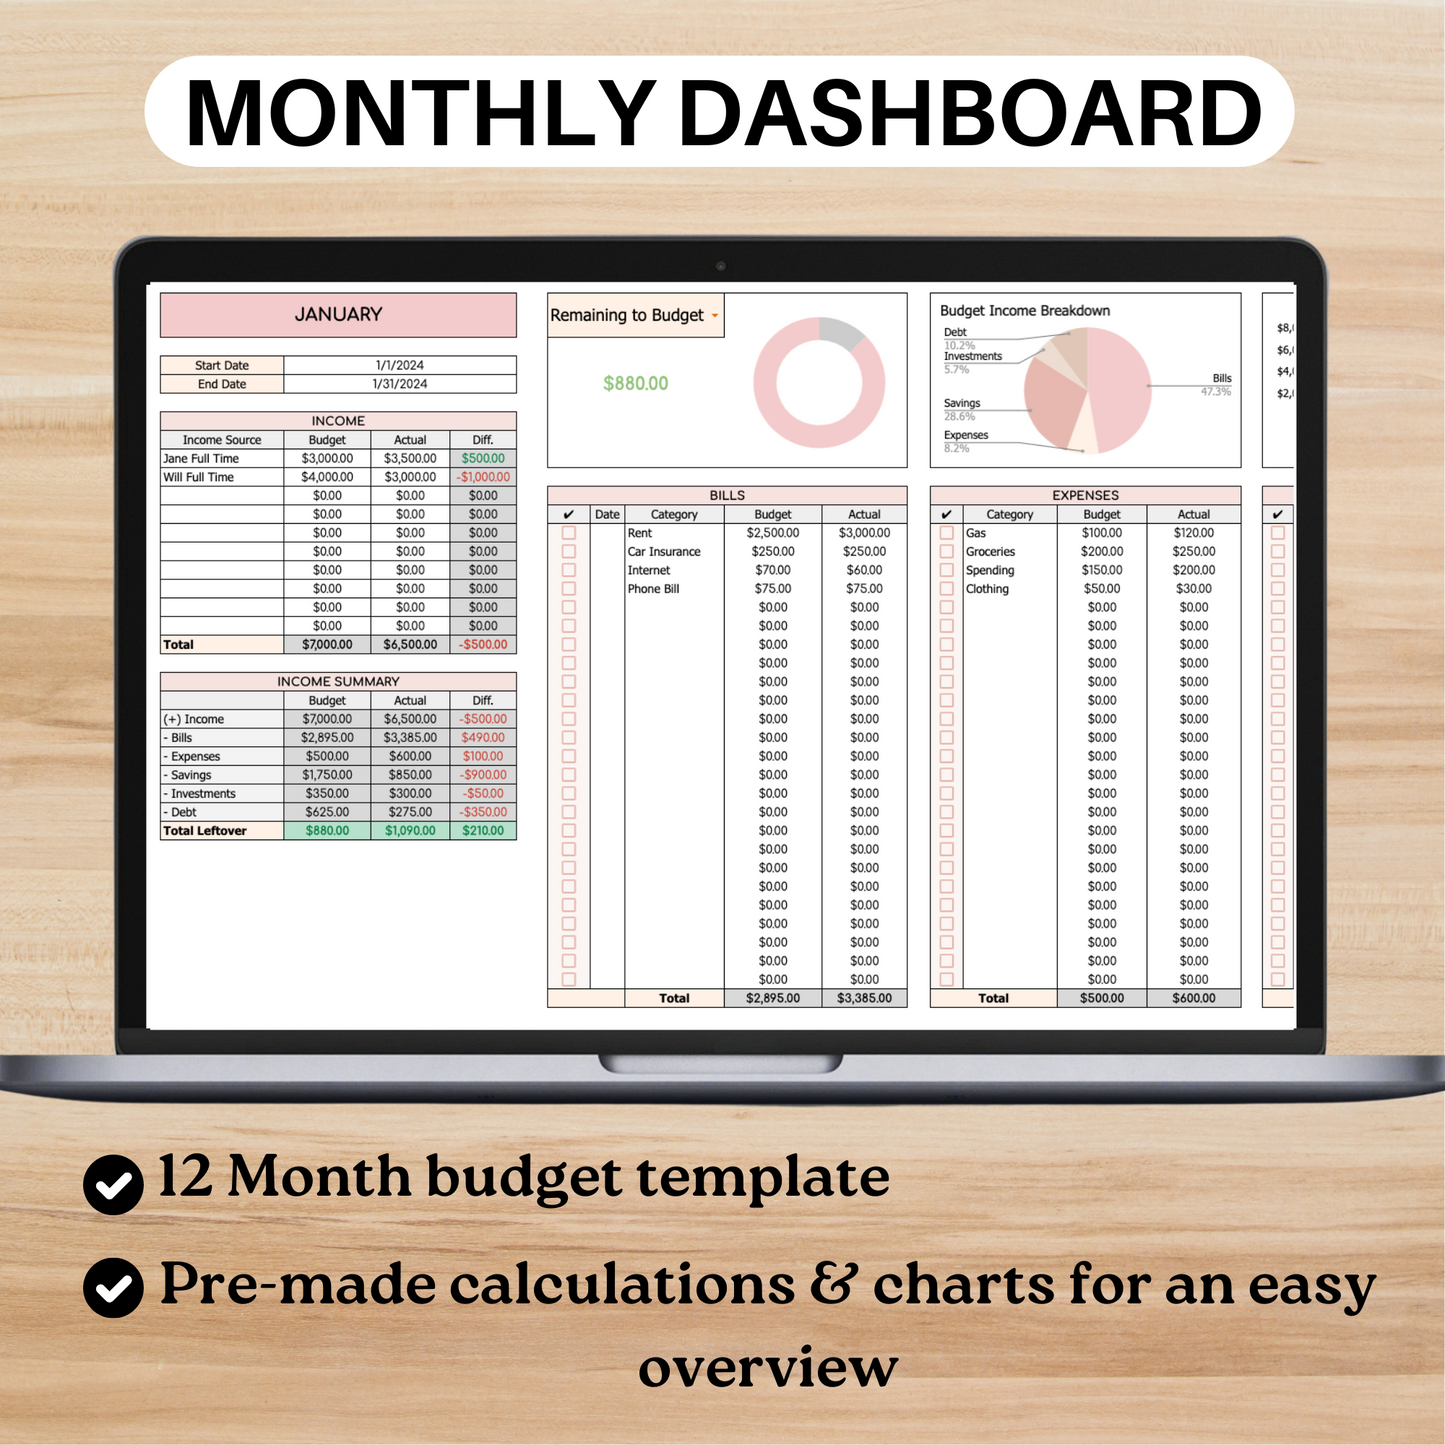 Budget by Month Template | Budget Spreadsheet